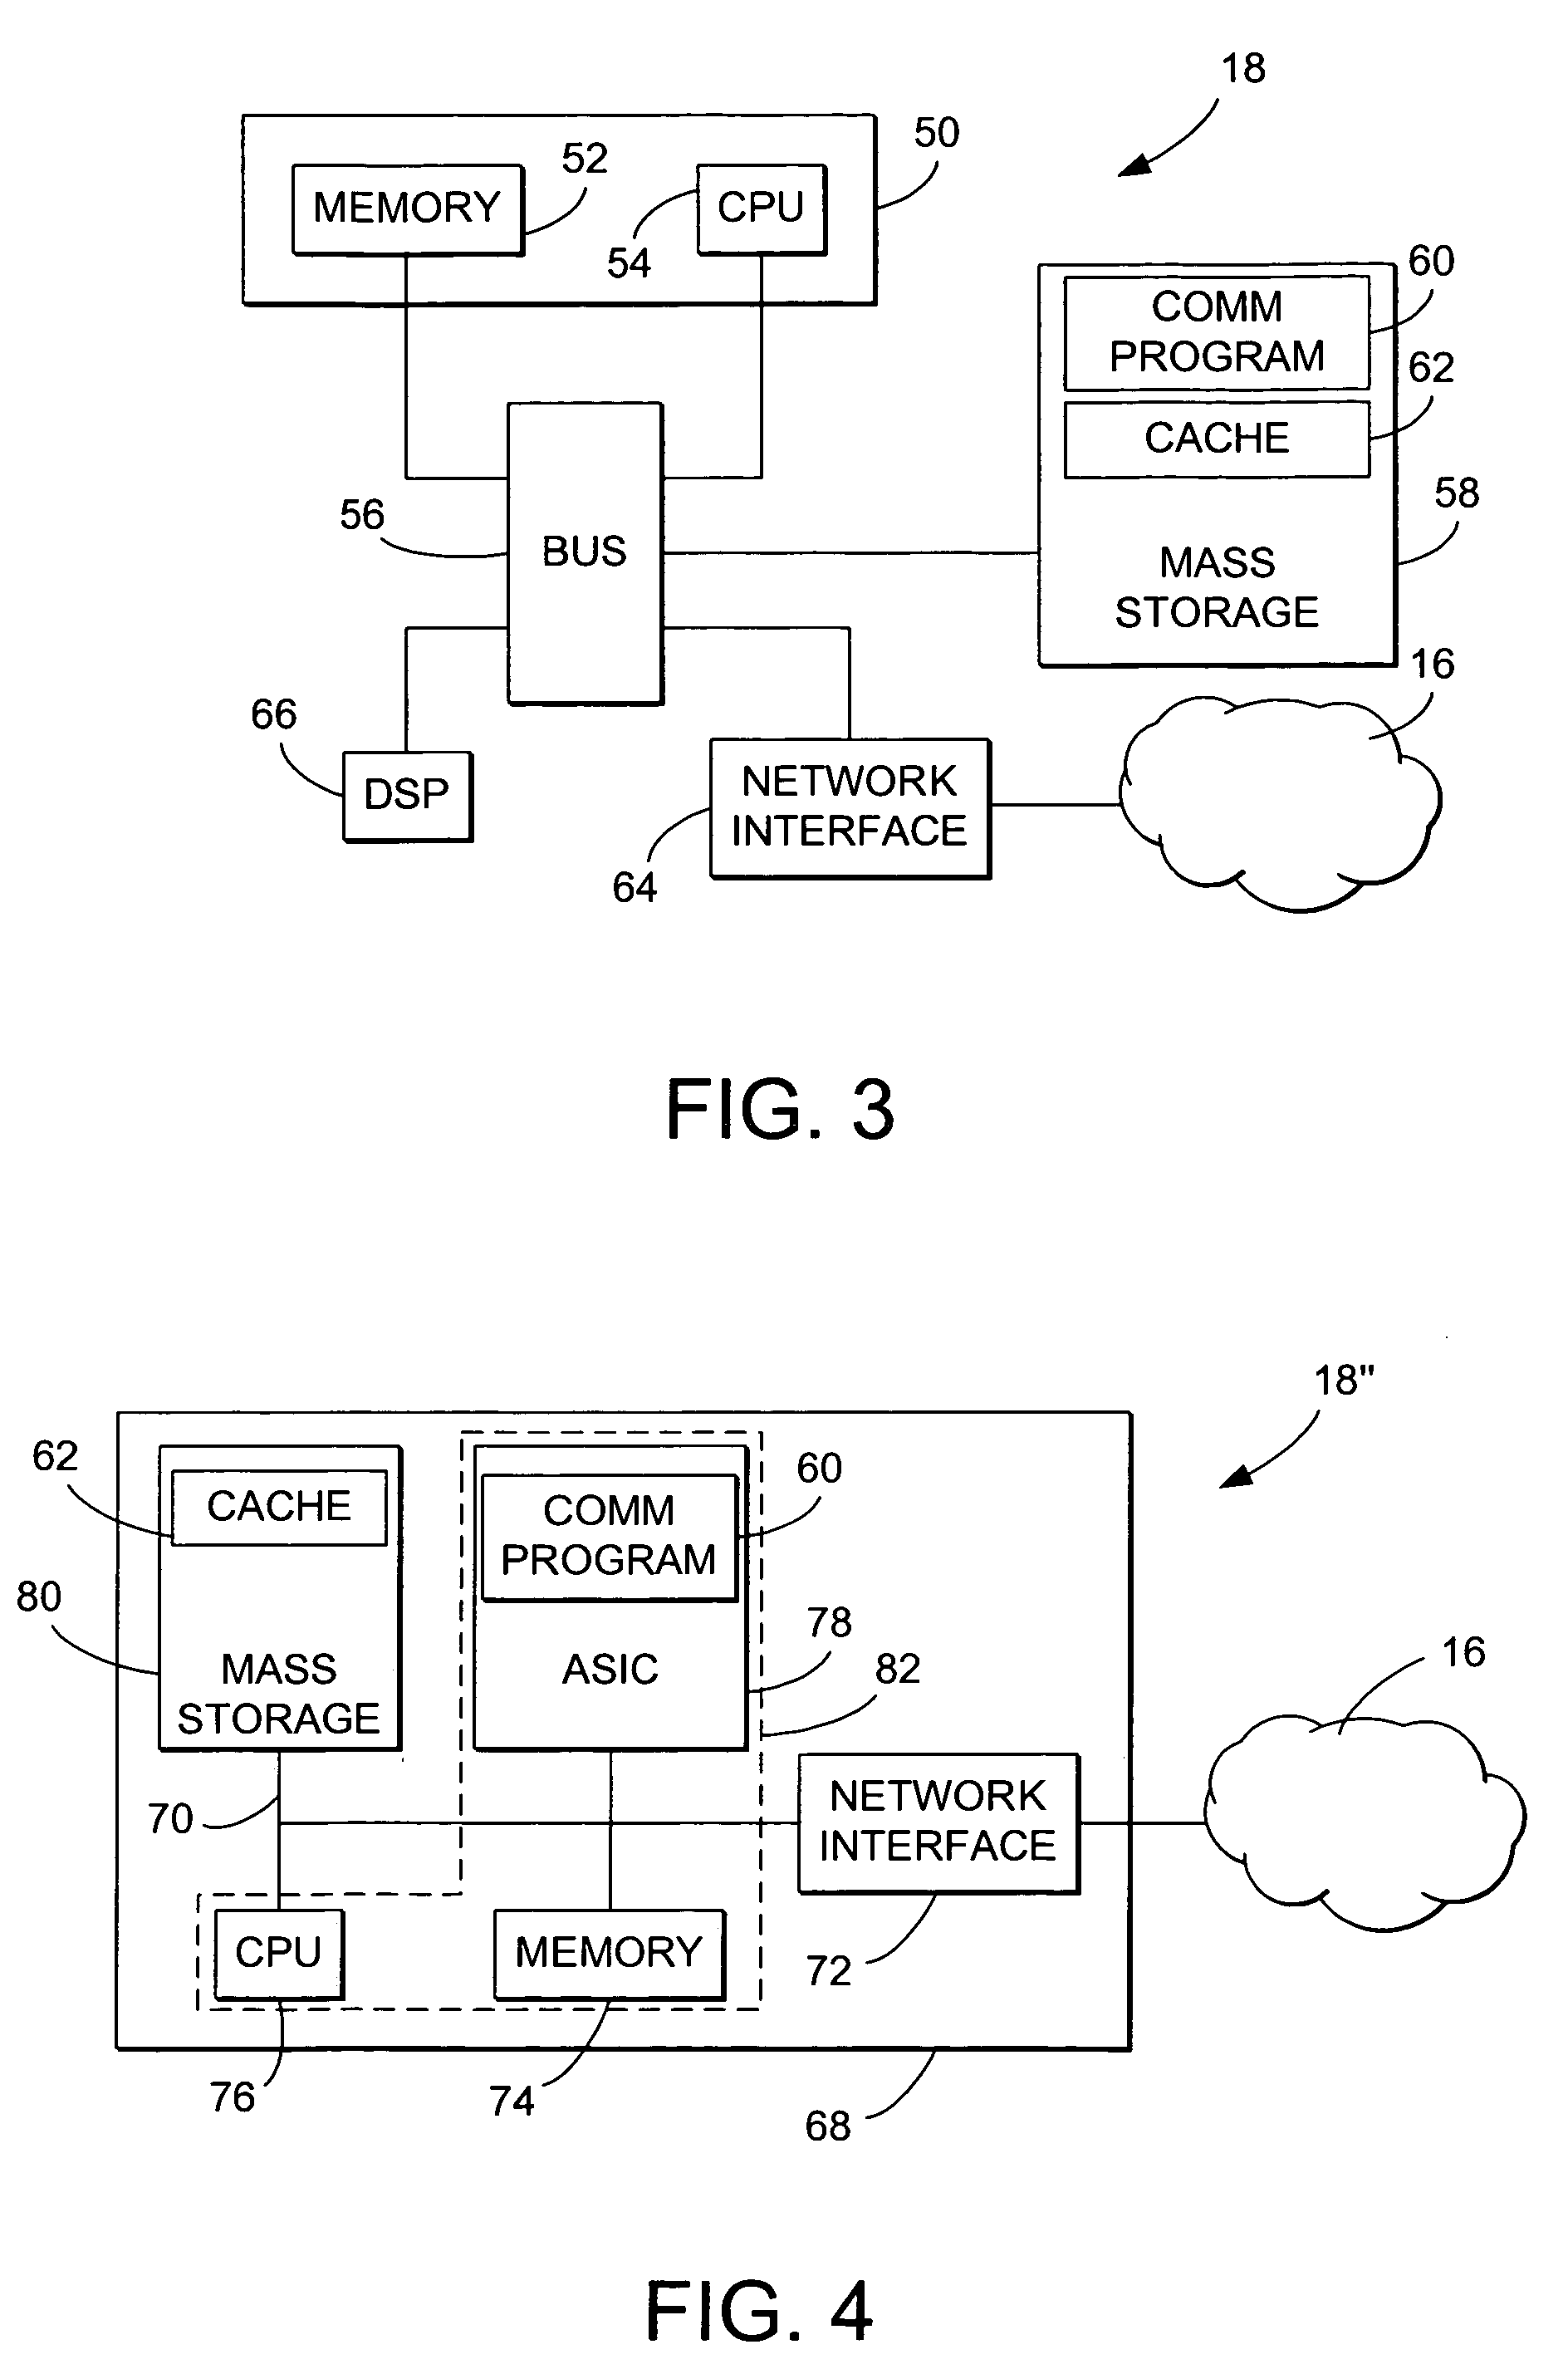 Web page source file transfer system and method